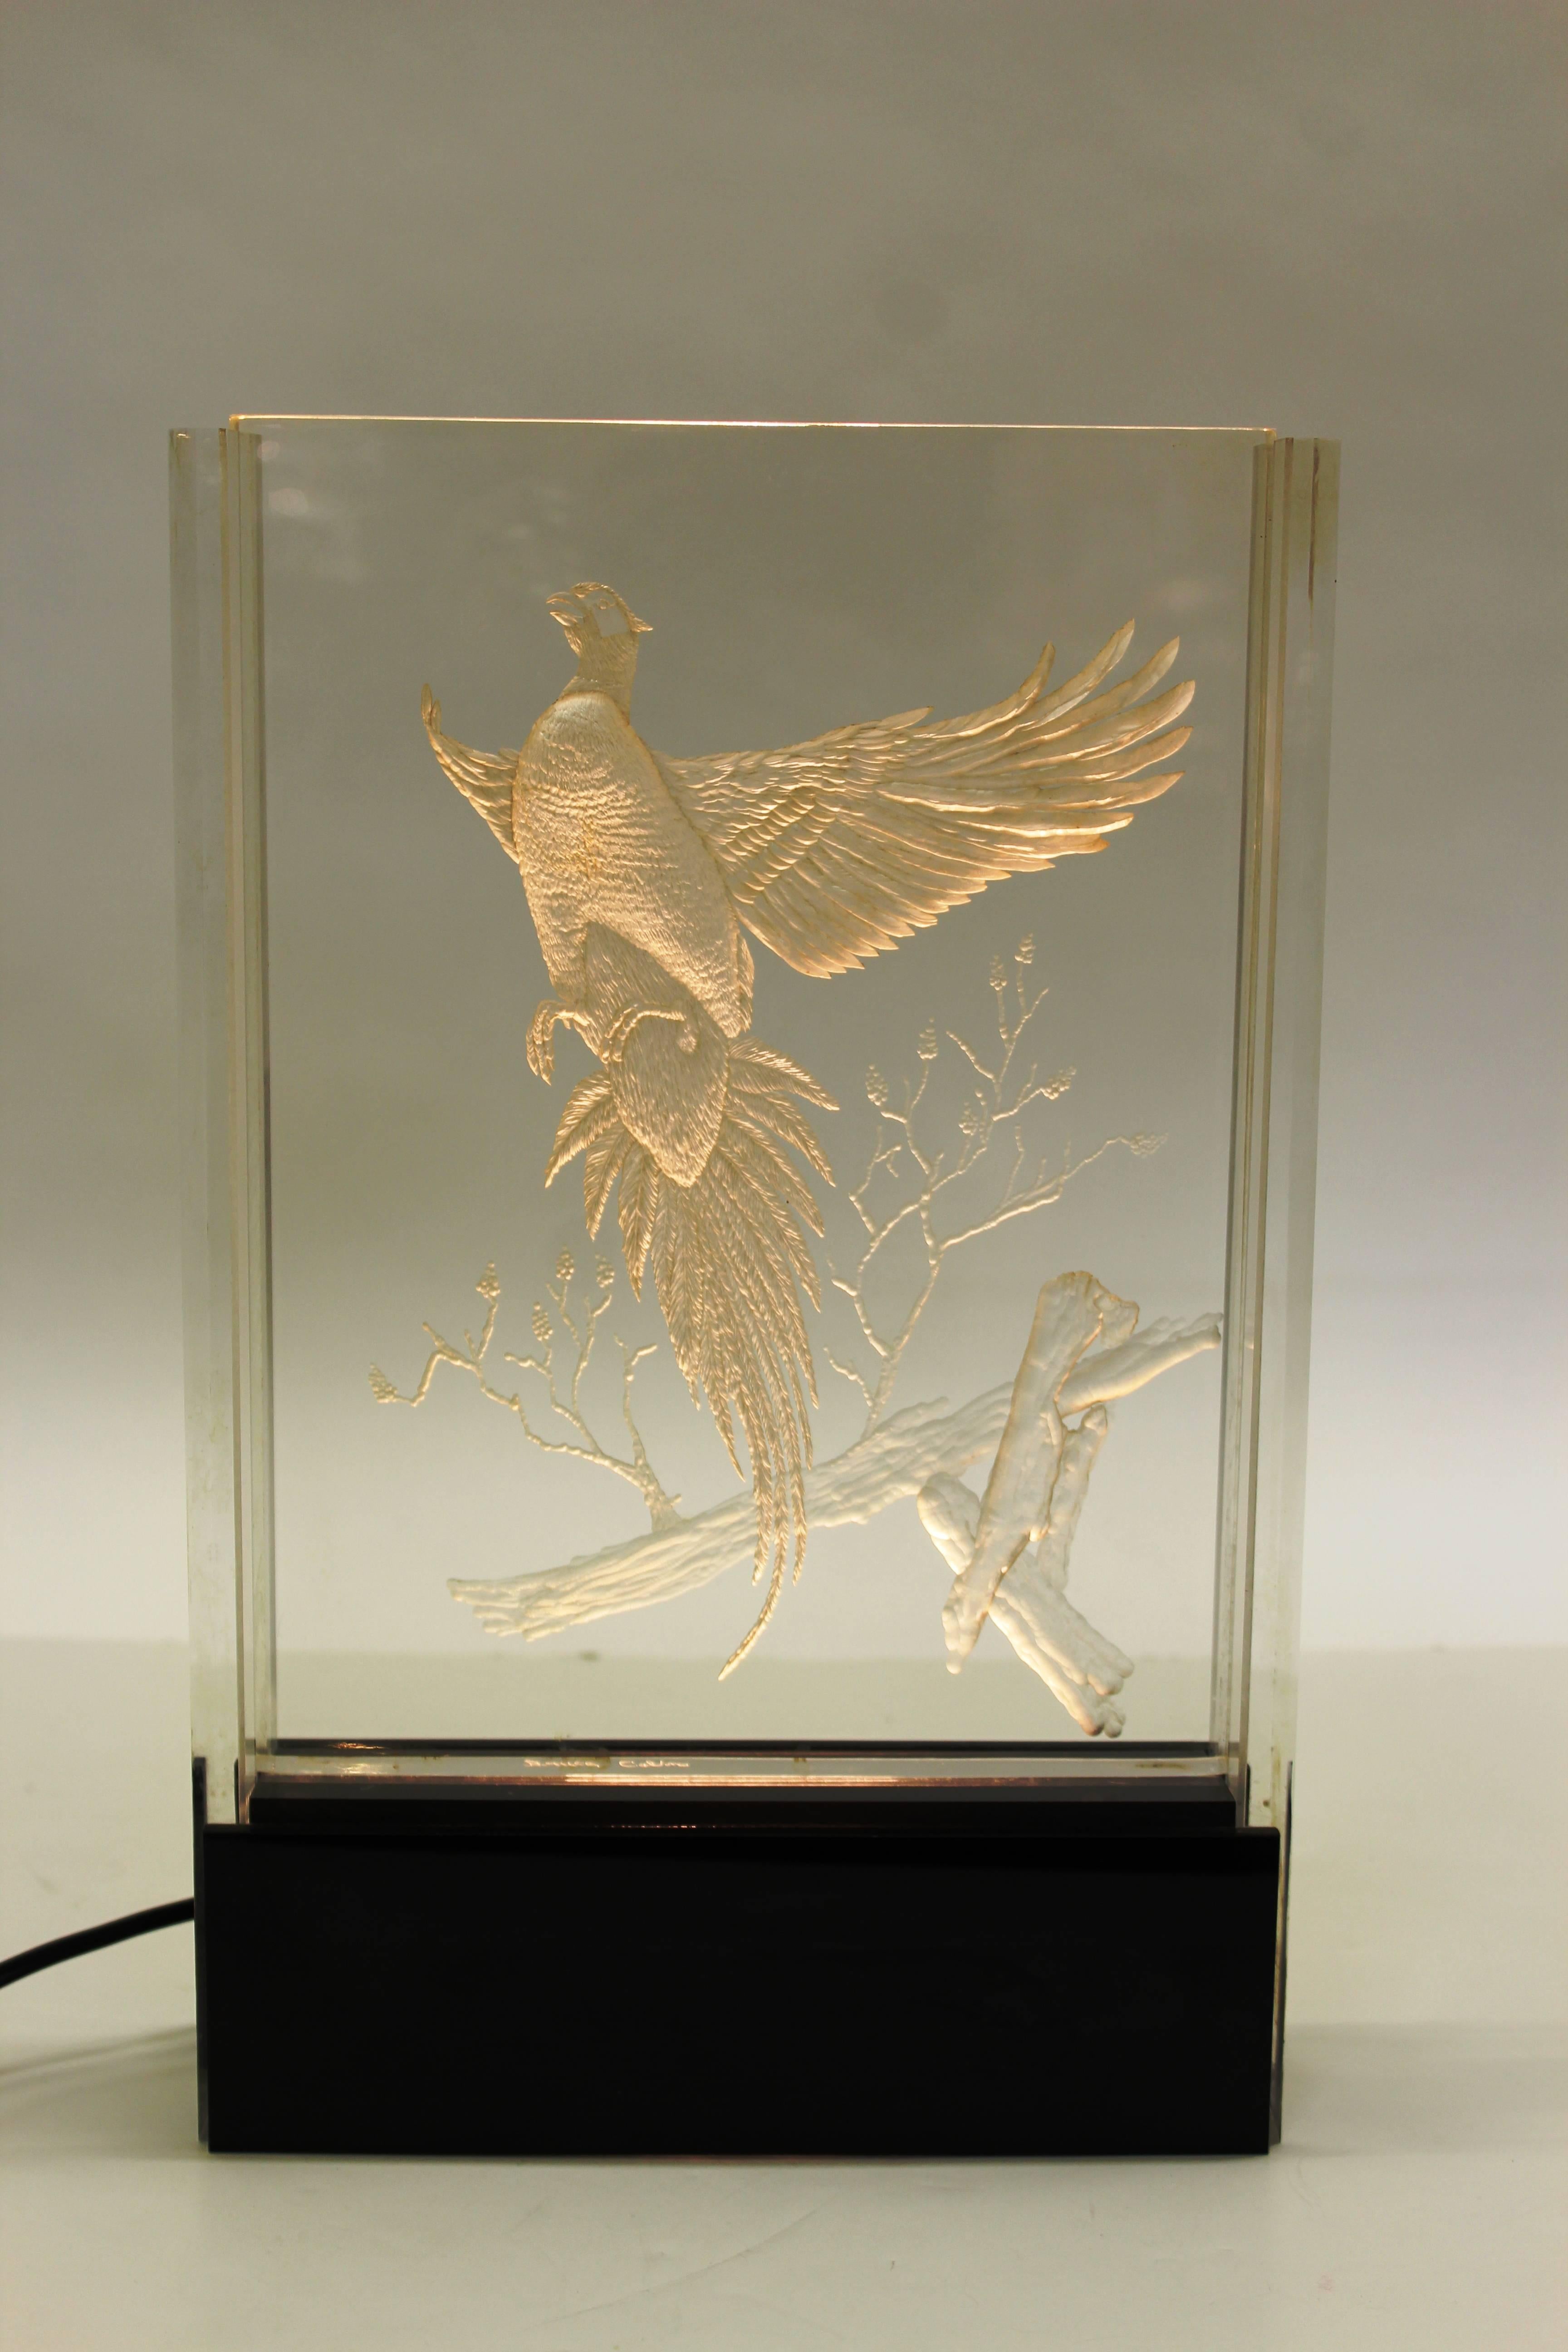 A Hollywood Regency table light made with an etched/engraved lucite panel depicting a pheasant in flight. The scene lights up when the light in the base is turned on. In great vintage condition.